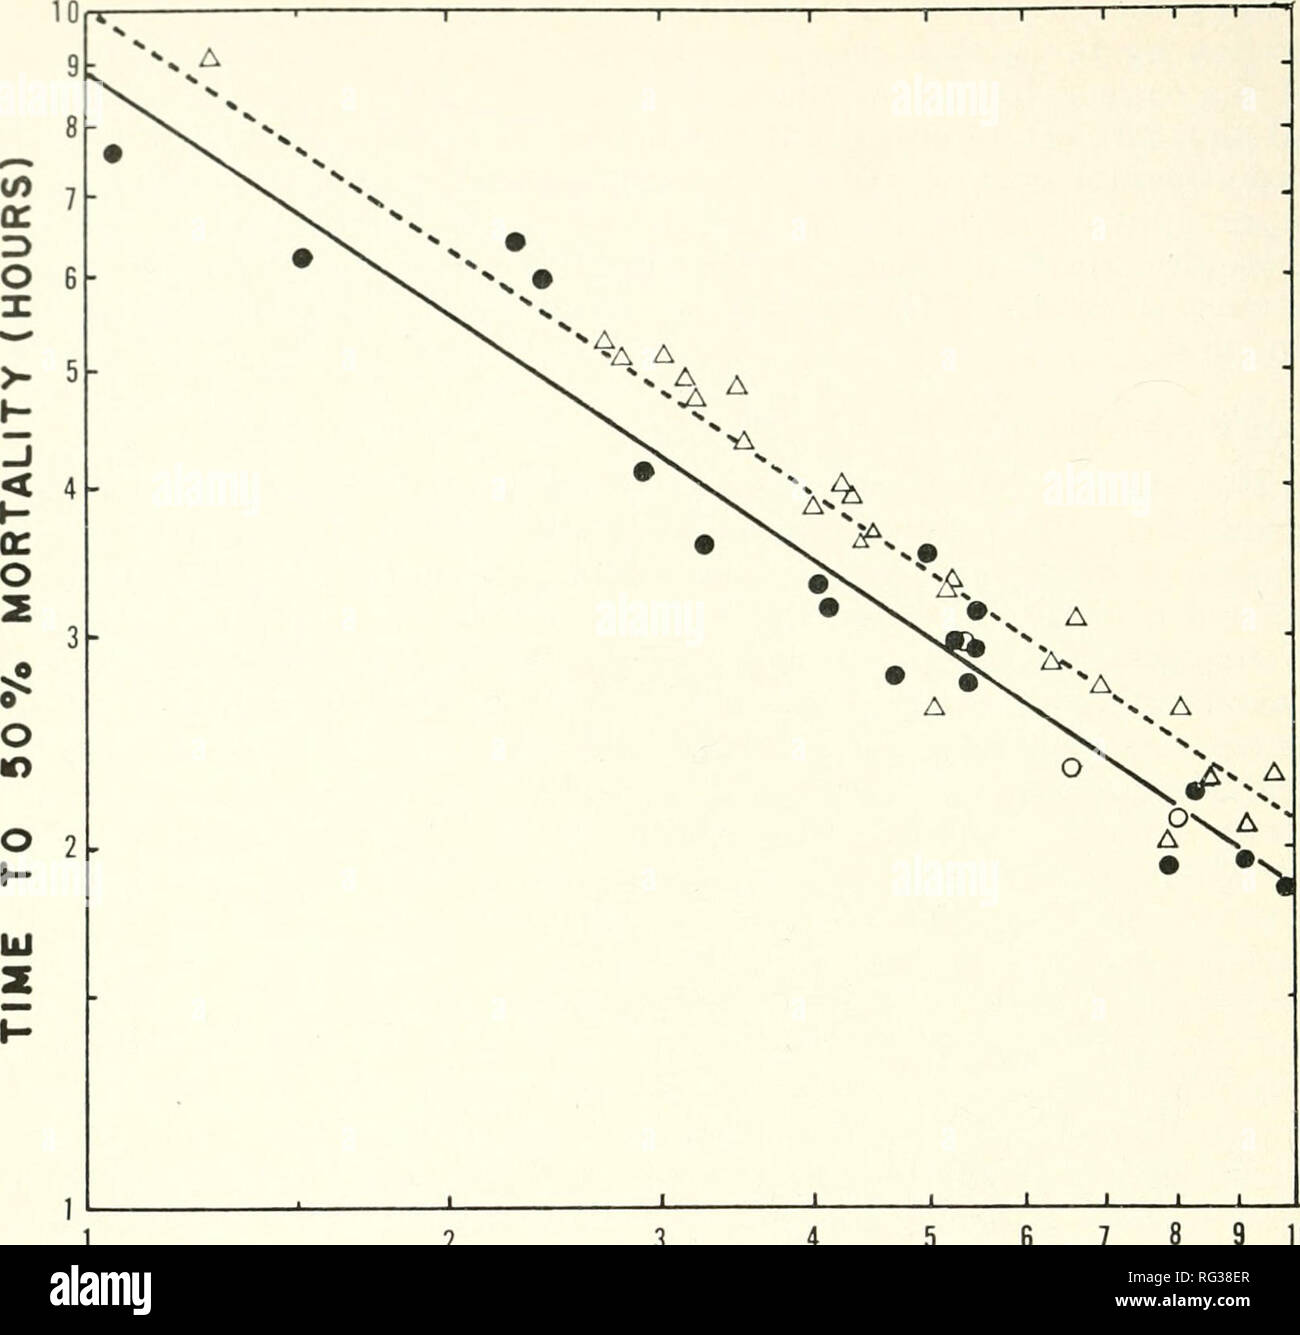 . California fish and game. Fisheries -- California; Game and game-birds -- California; Fishes -- California; Animal Population Groups; PÃªches; Gibier; Poissons. U8 CALIFORNIA FISH AND GAME. 2 3 4 5 WEIGHT IN GRAMS 9 10 FIGURE 1. The regression of mean weight of anesthetized and non-anesthetized groups of Girella nigricans on the time to 50-percent mortality. The abscissa is the mean weight in grams of 10 Girella of similar size; the ordinate is the time of 50-percent mortality in hours corrected for available oxygen. Experiments were per- formed in sealed 1 gallon jars. The black faced circl Stock Photo